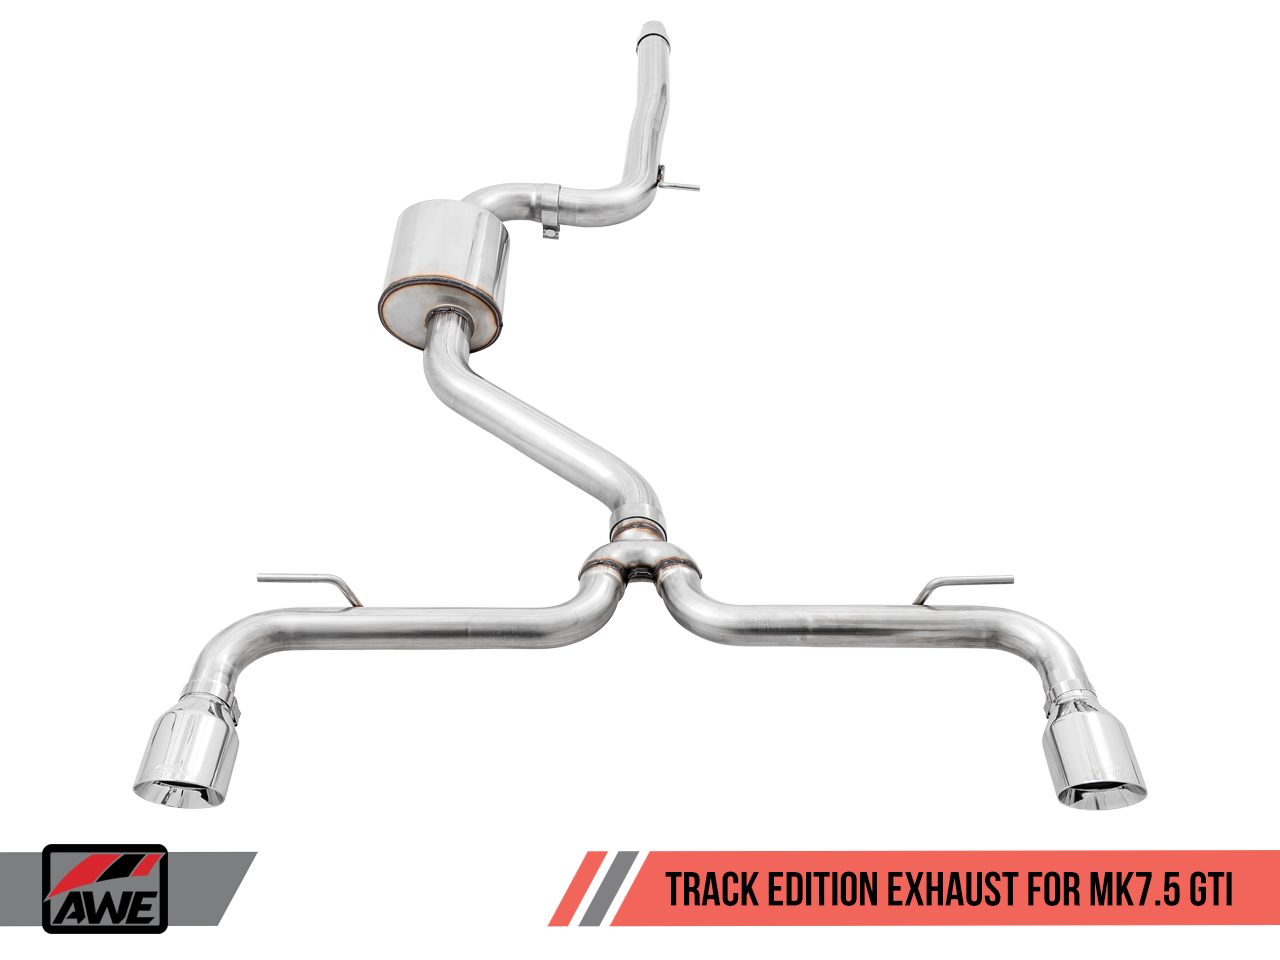 AWE Track Edition Exhaust for VW MK7.5 GTI - Chrome Silver Tips - 0